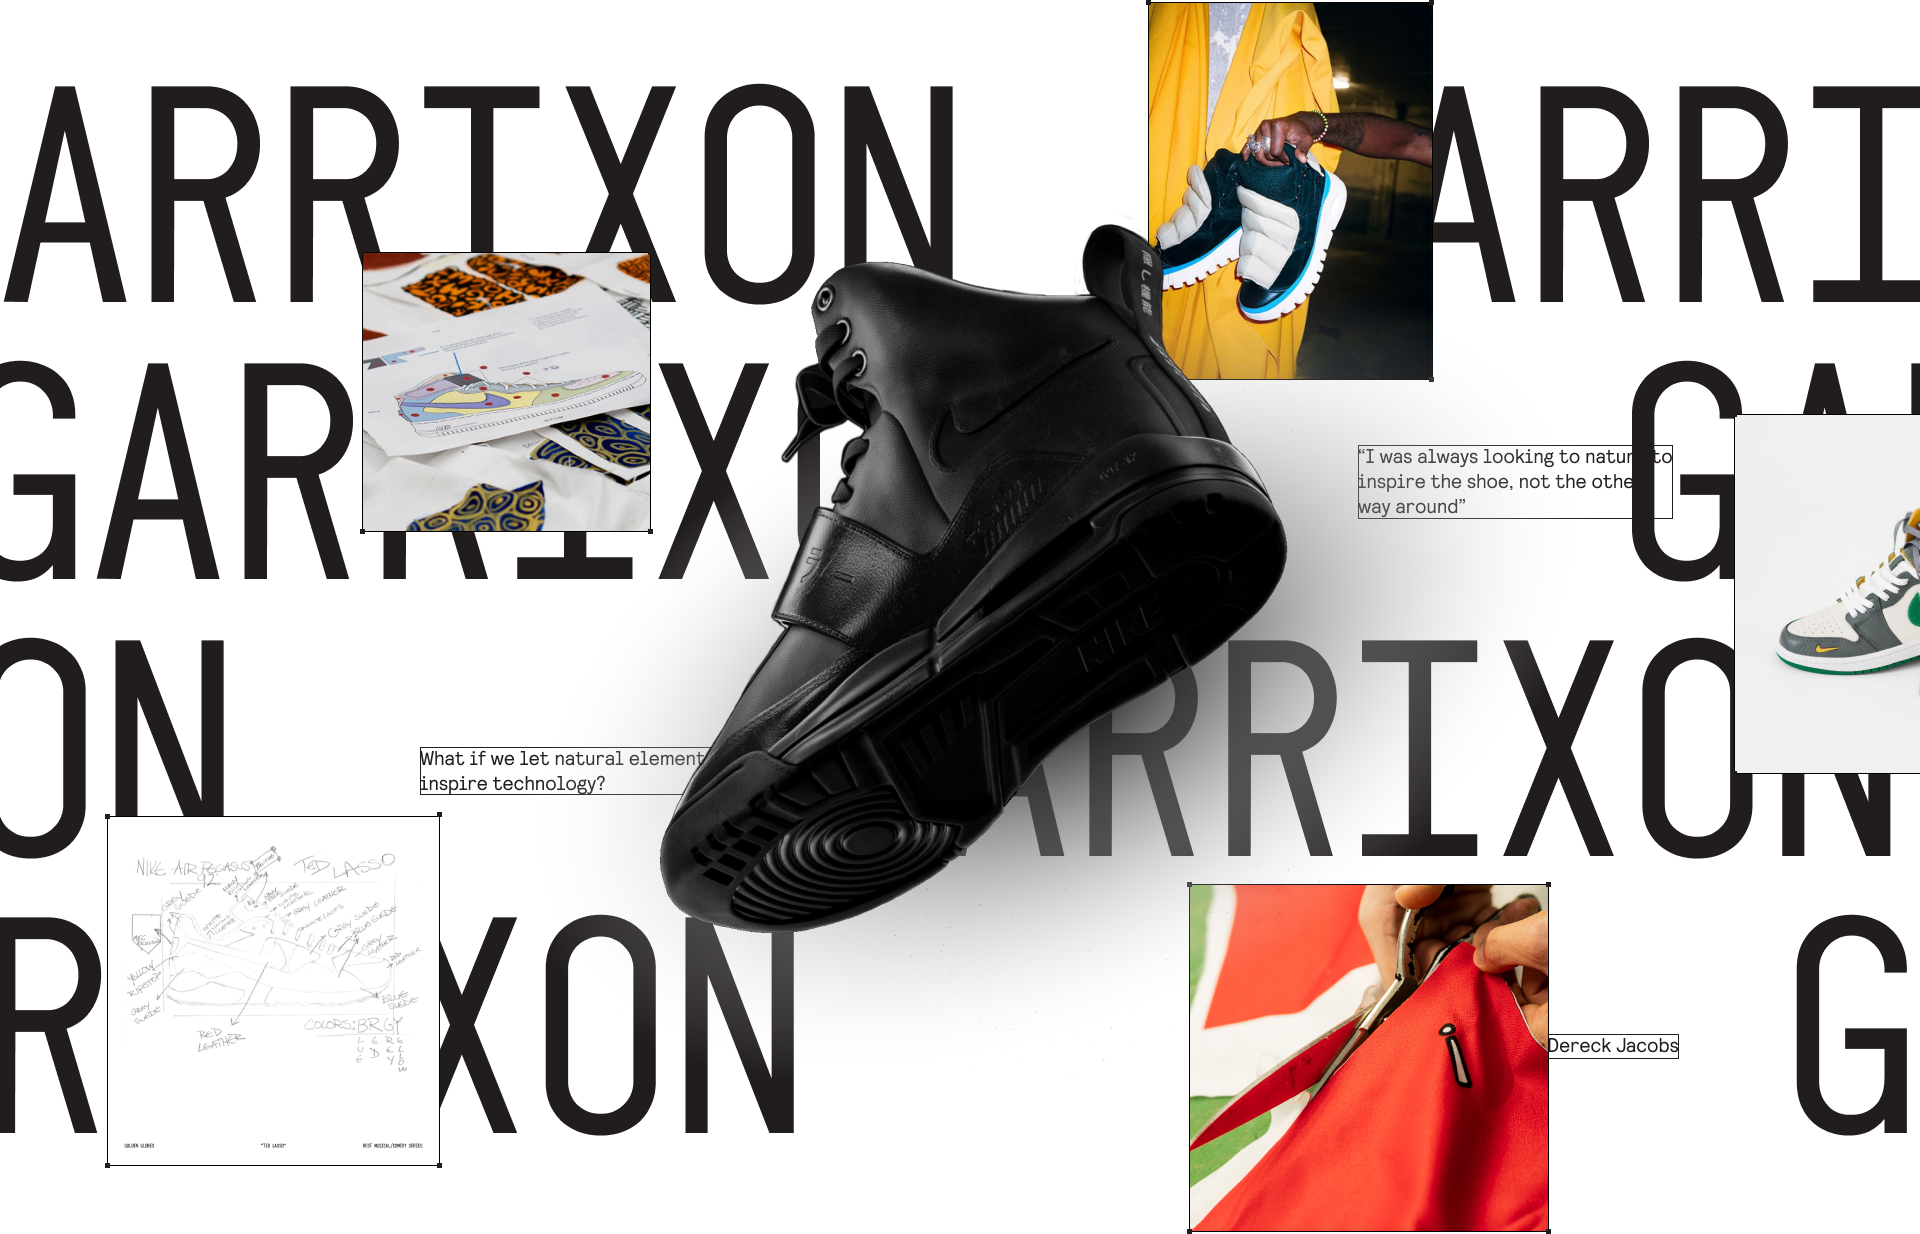 GARRIXON — Solving a sneaker brand’s “identity crisis” by focusing on its creators.